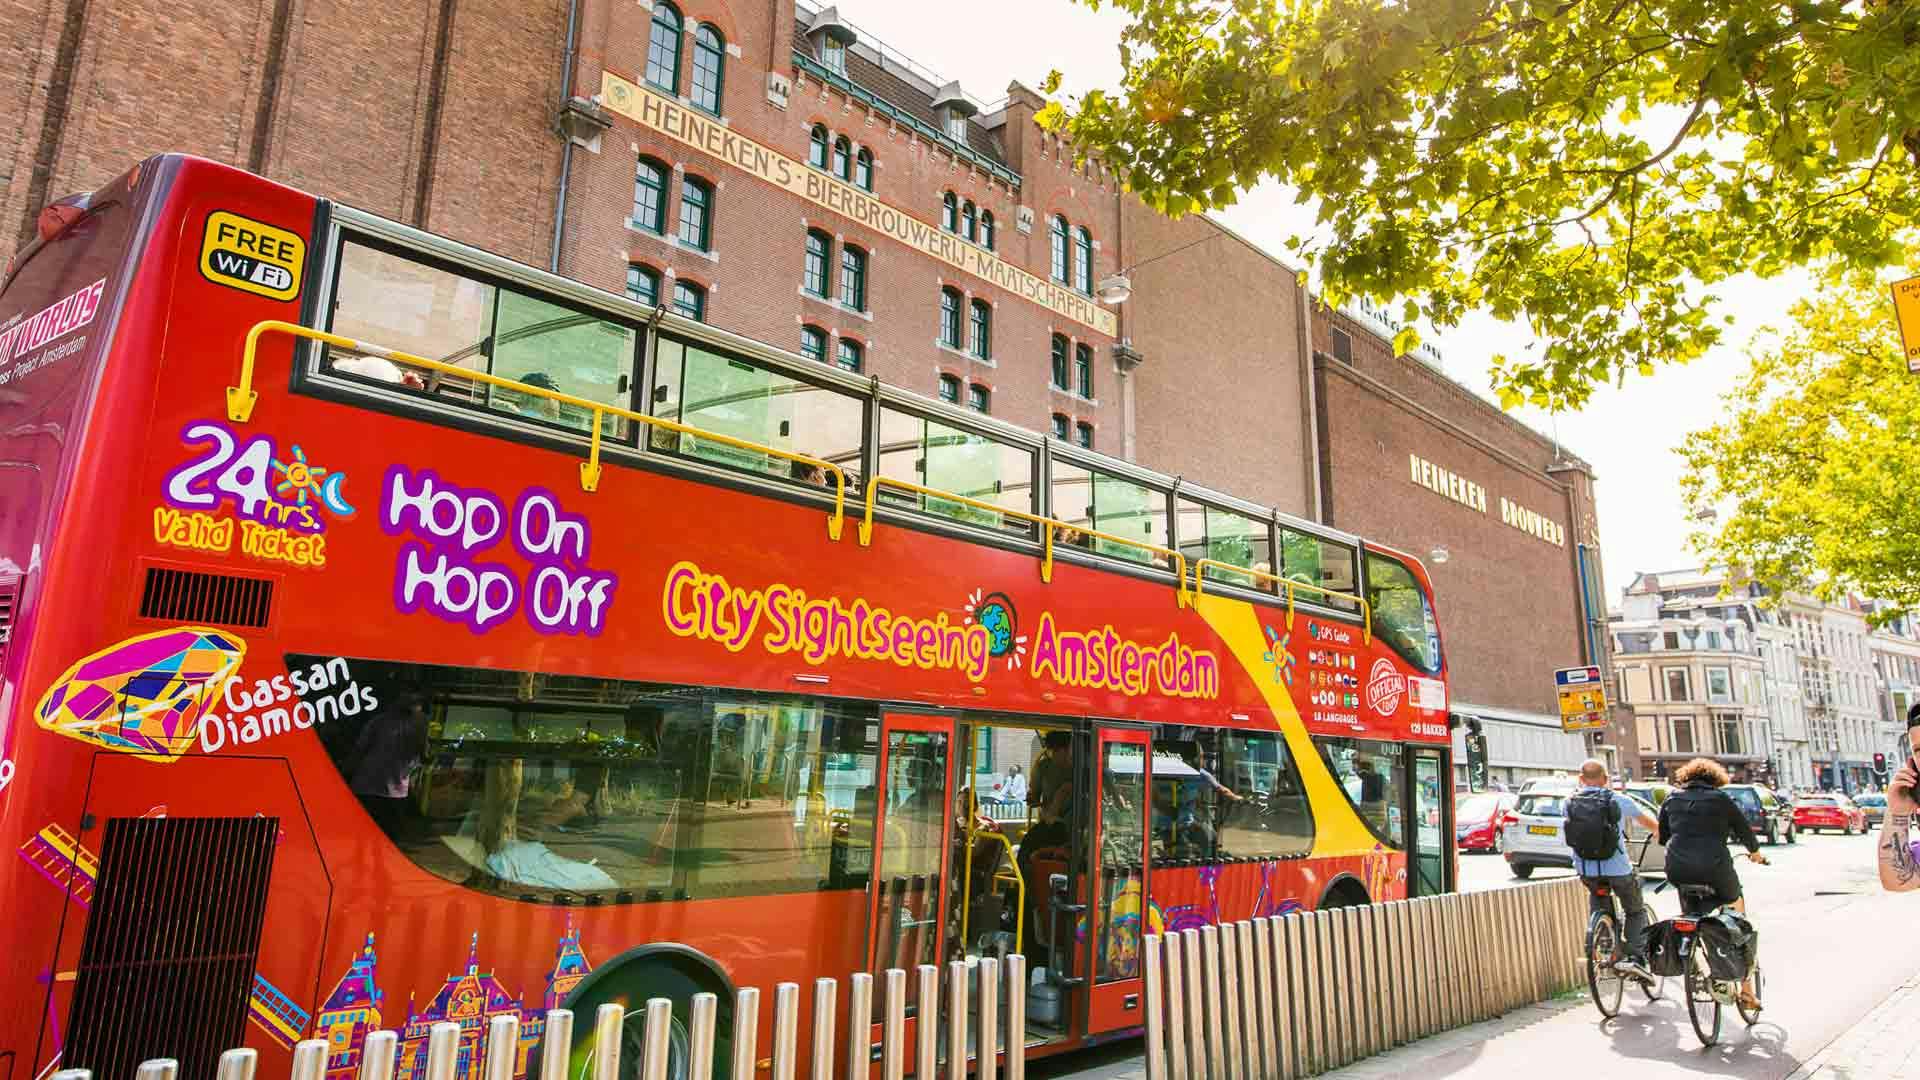 City Sightseeing Amsterdam - Hop On - Hop Off Bus & Boot